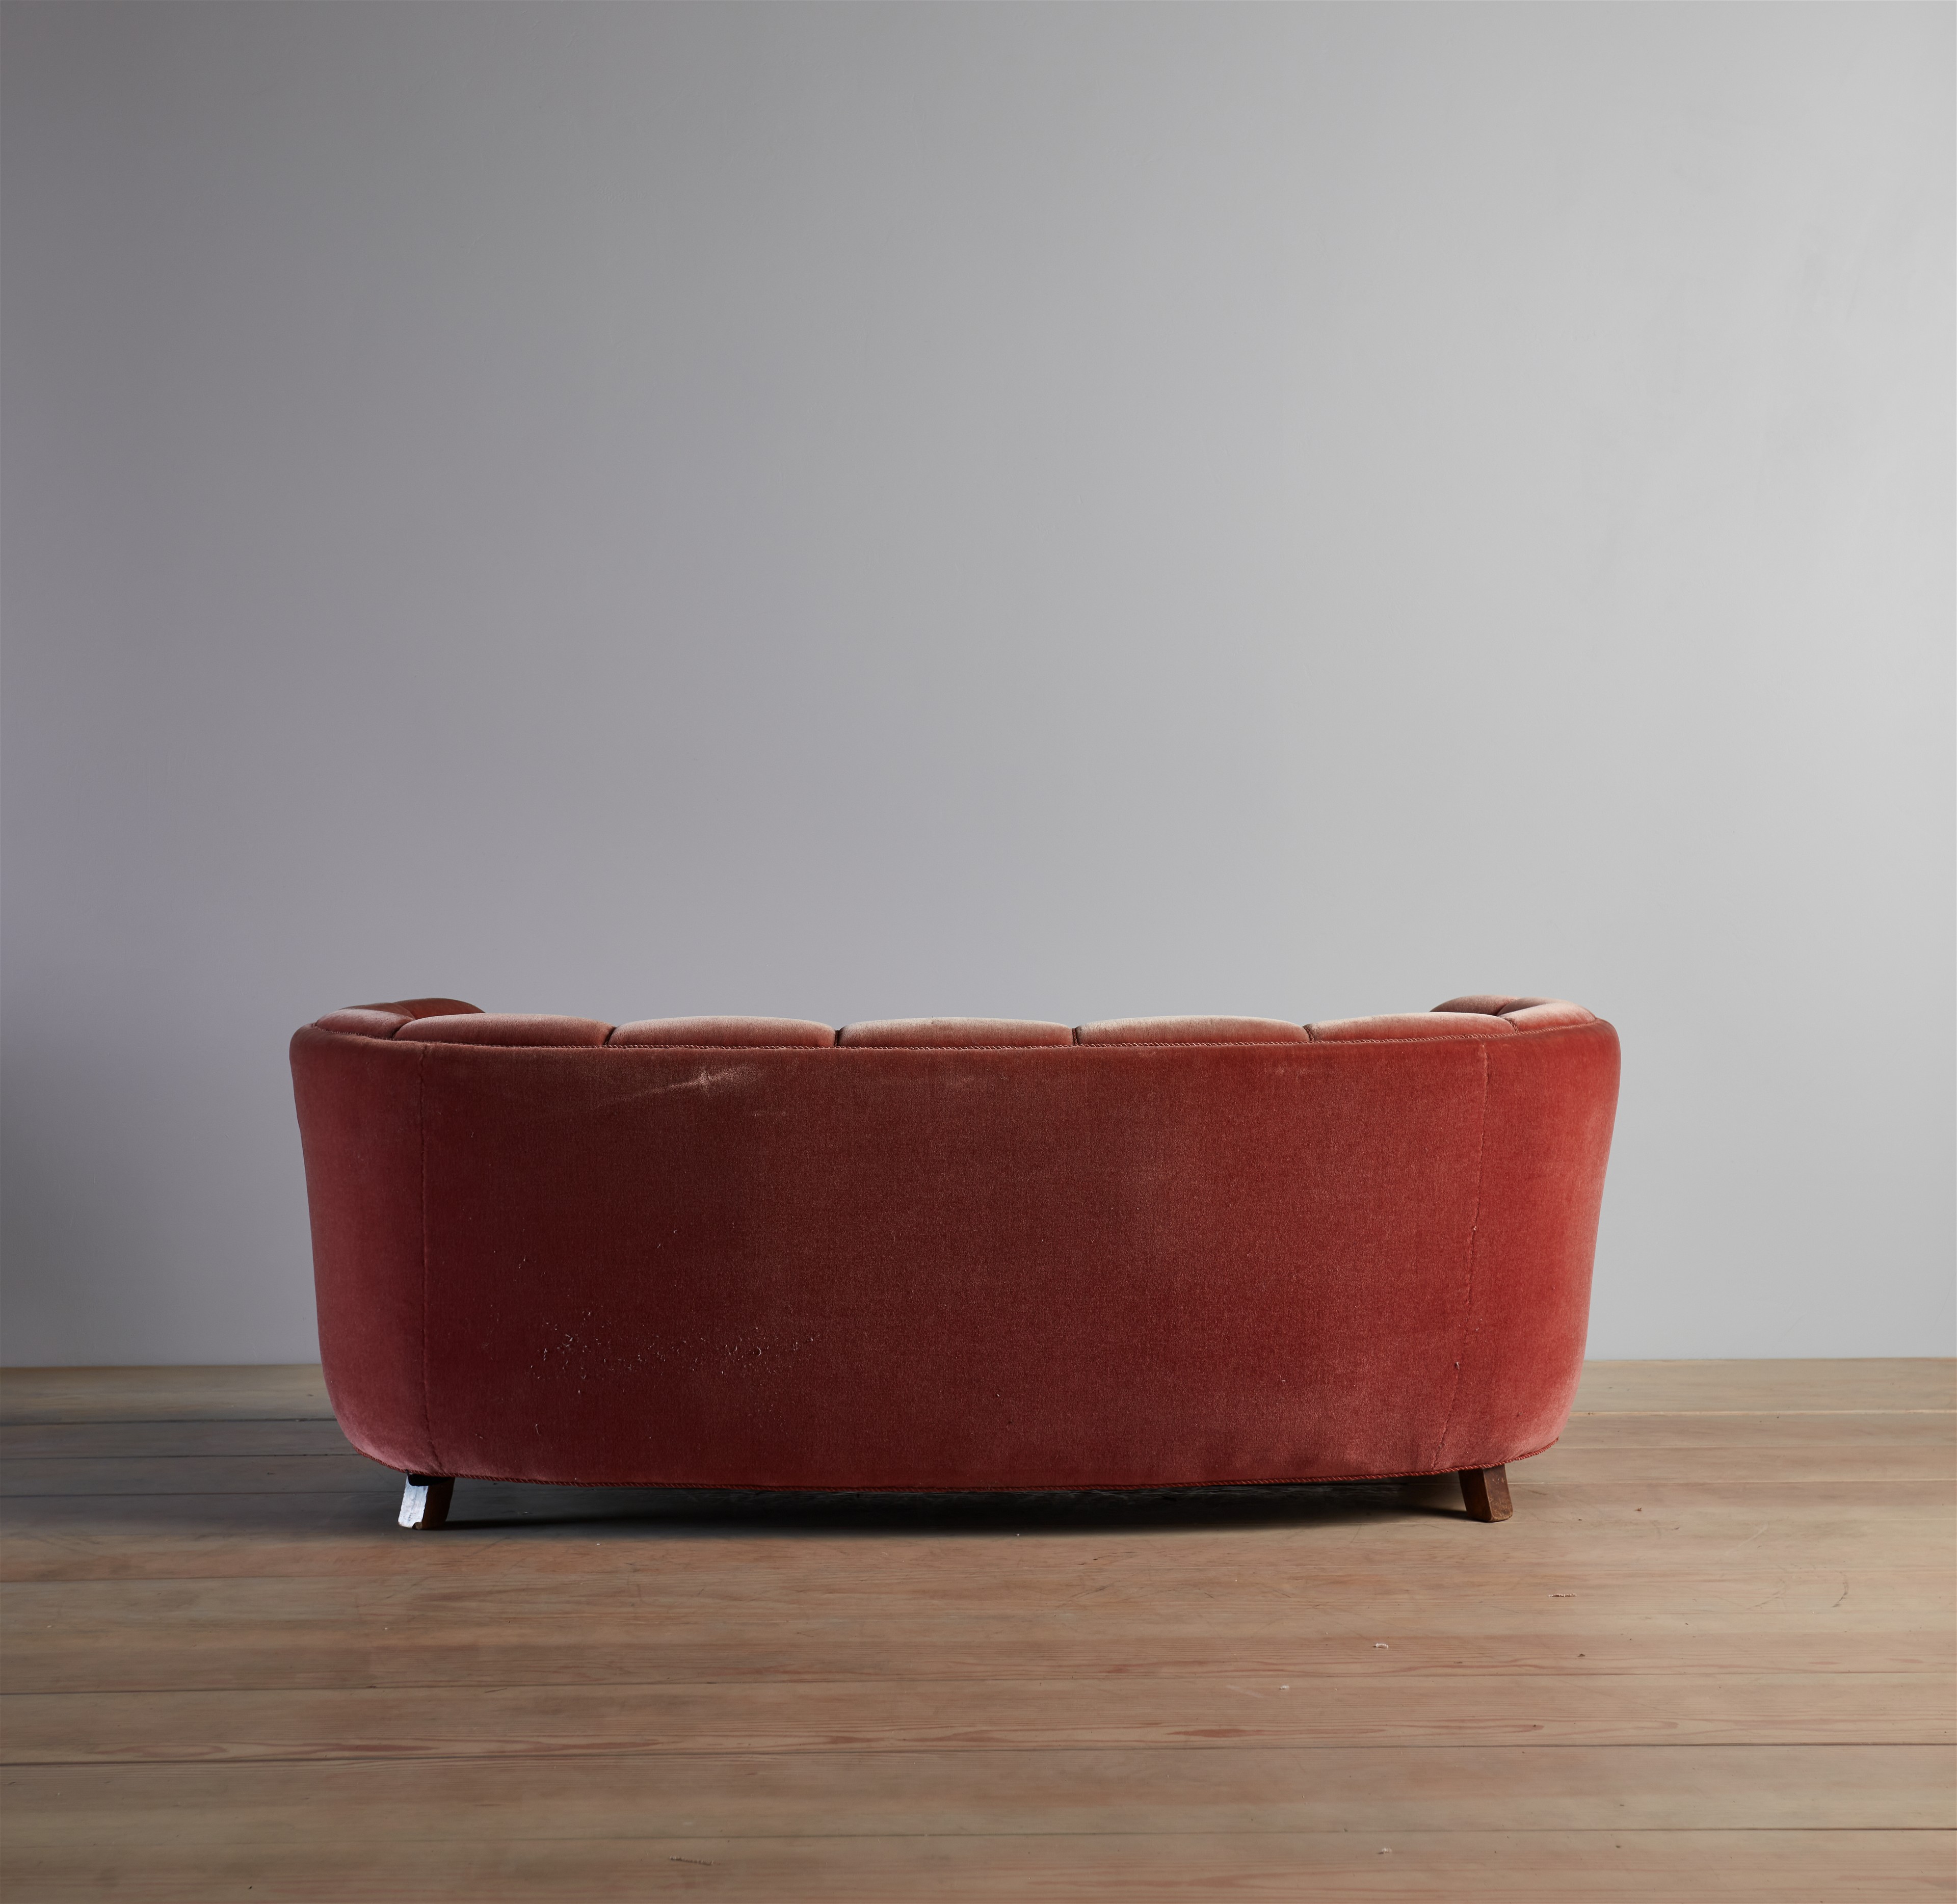 a red couch sitting on top of a wooden floor